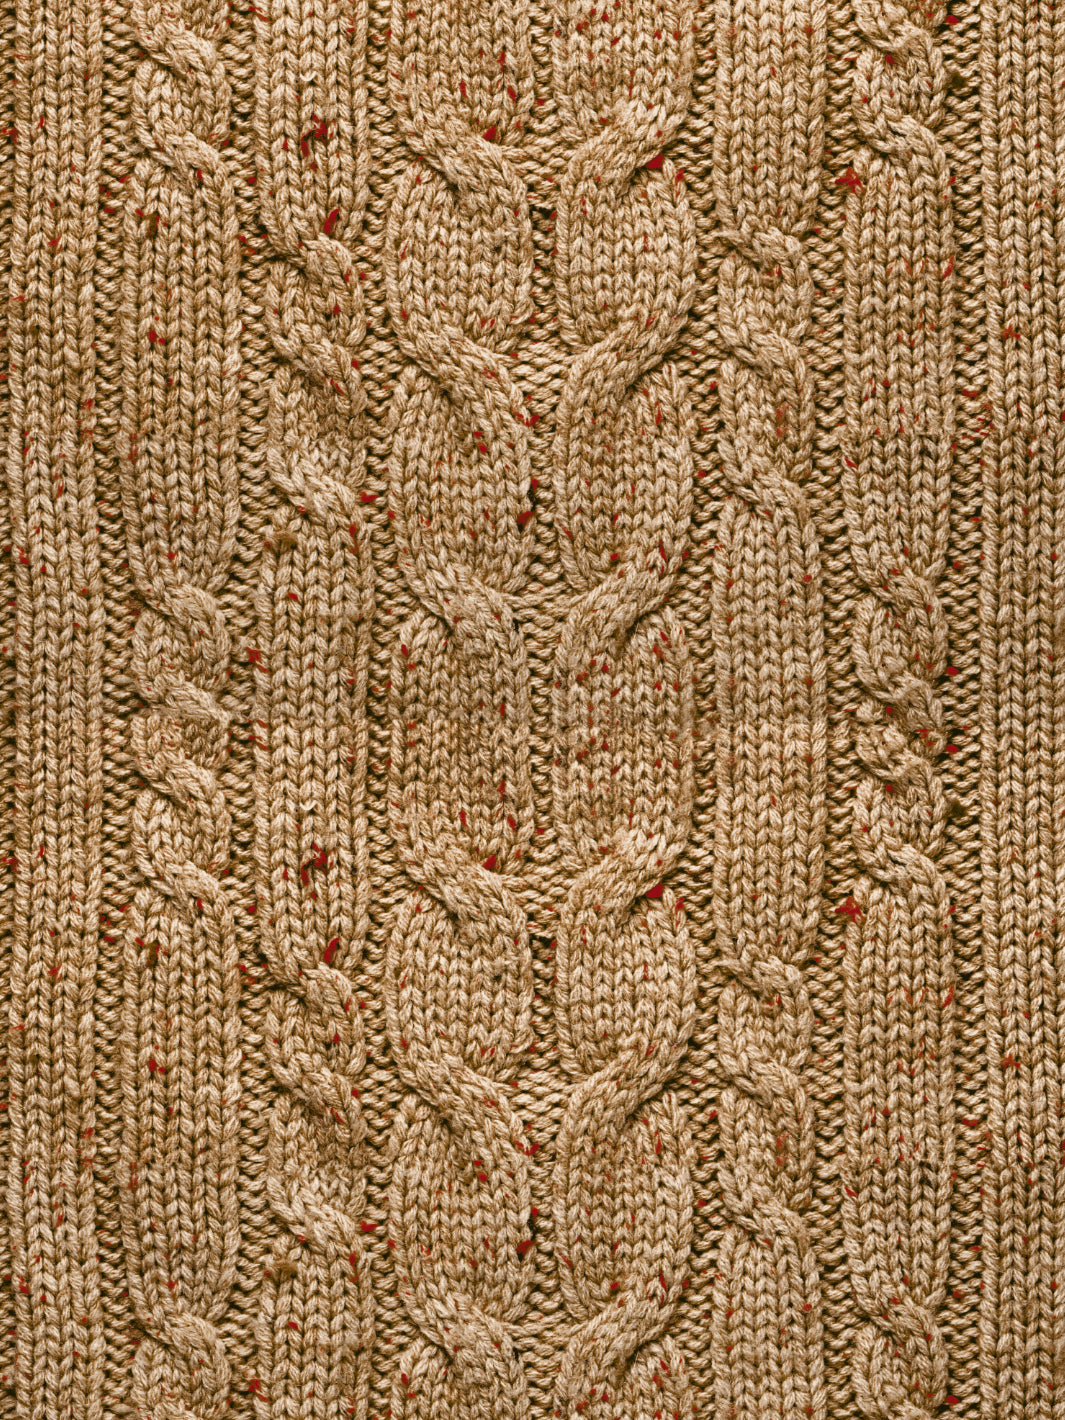 'Cable Knit' Wallpaper by Lingua Franca - Brown